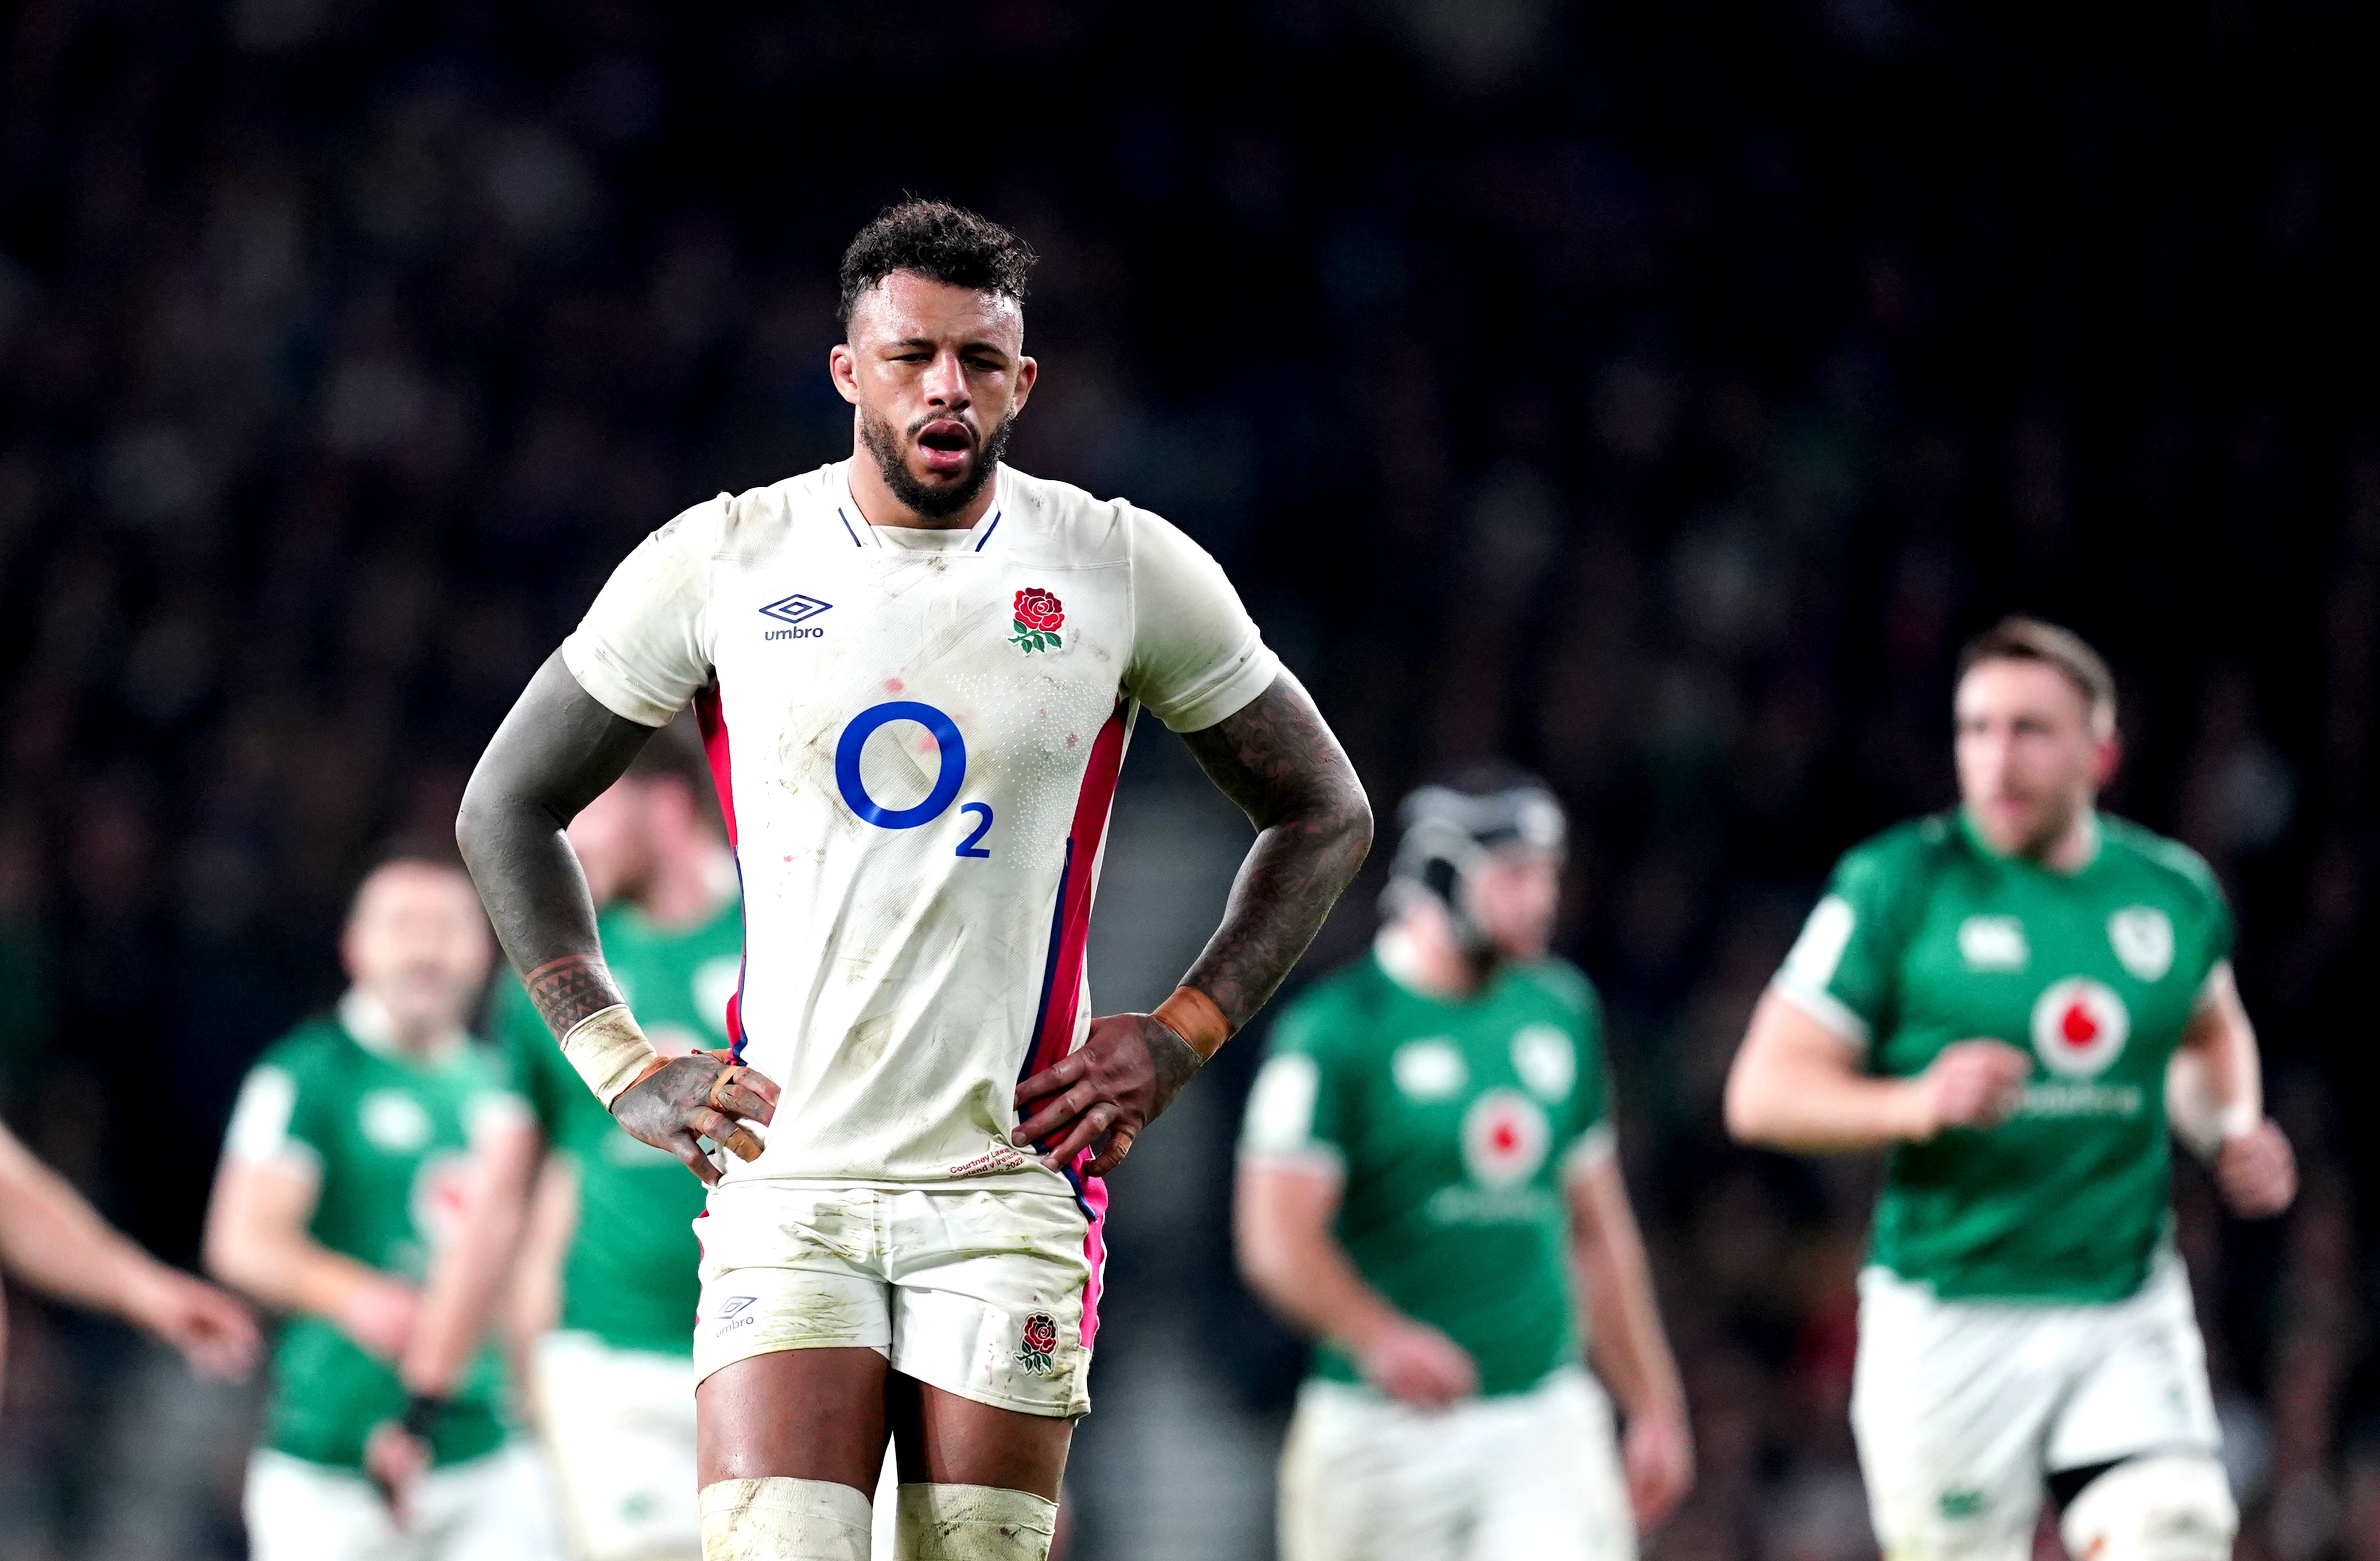 England suffered a poor Six Nations earlier this year